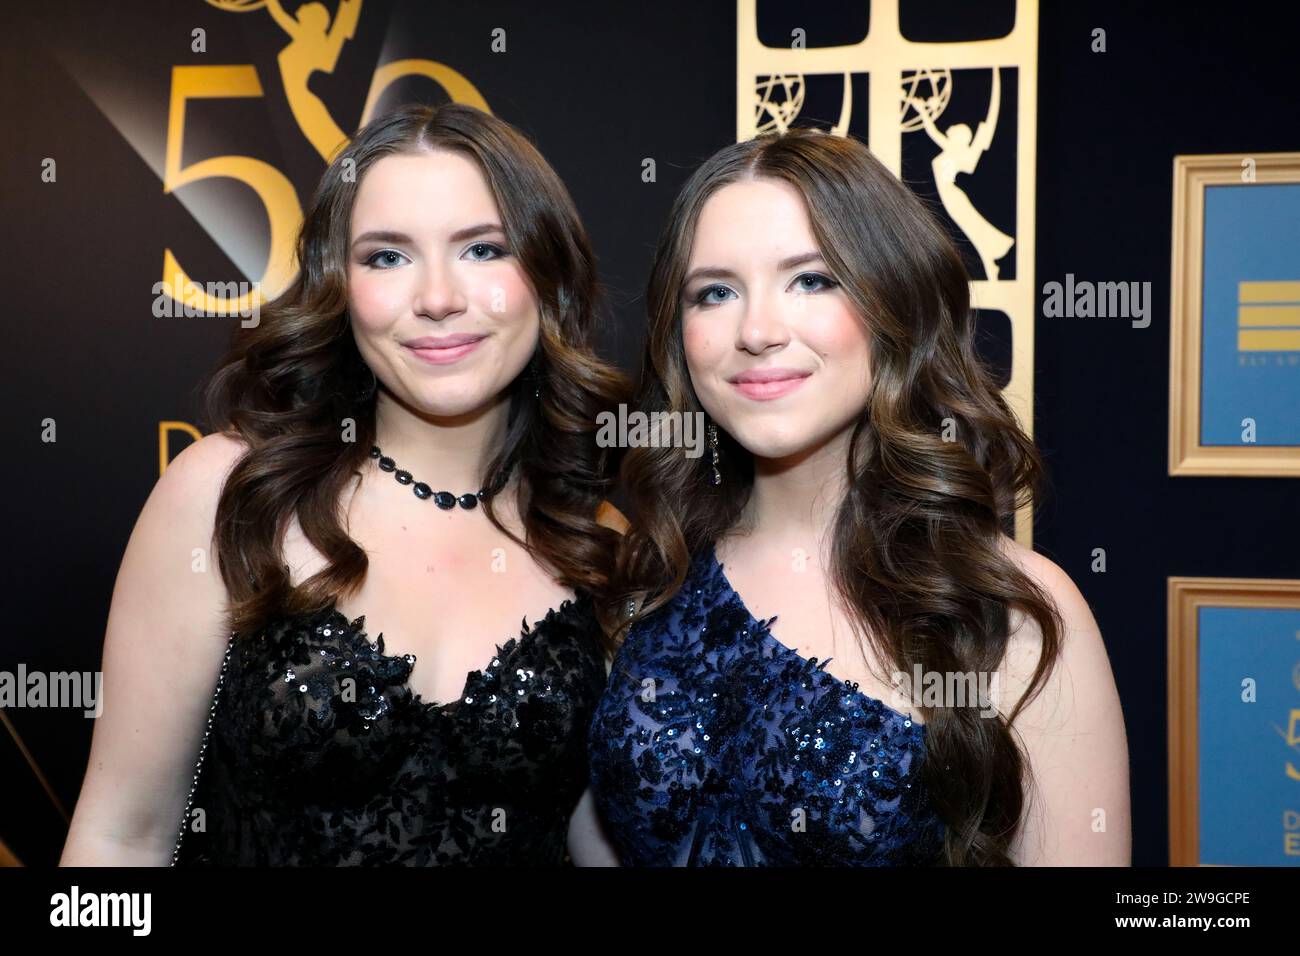 Los Angeles, California, USA. 15th December, 2023. Actresses Chiara D'Ambrosio and Bianca D'Ambrosio attending the 50th Annual Daytime Emmy Awards at the Westin Bonaventure Hotel & Suites, Los Angeles, California on December 15, 2023. Credit: Sheri Determan Stock Photo